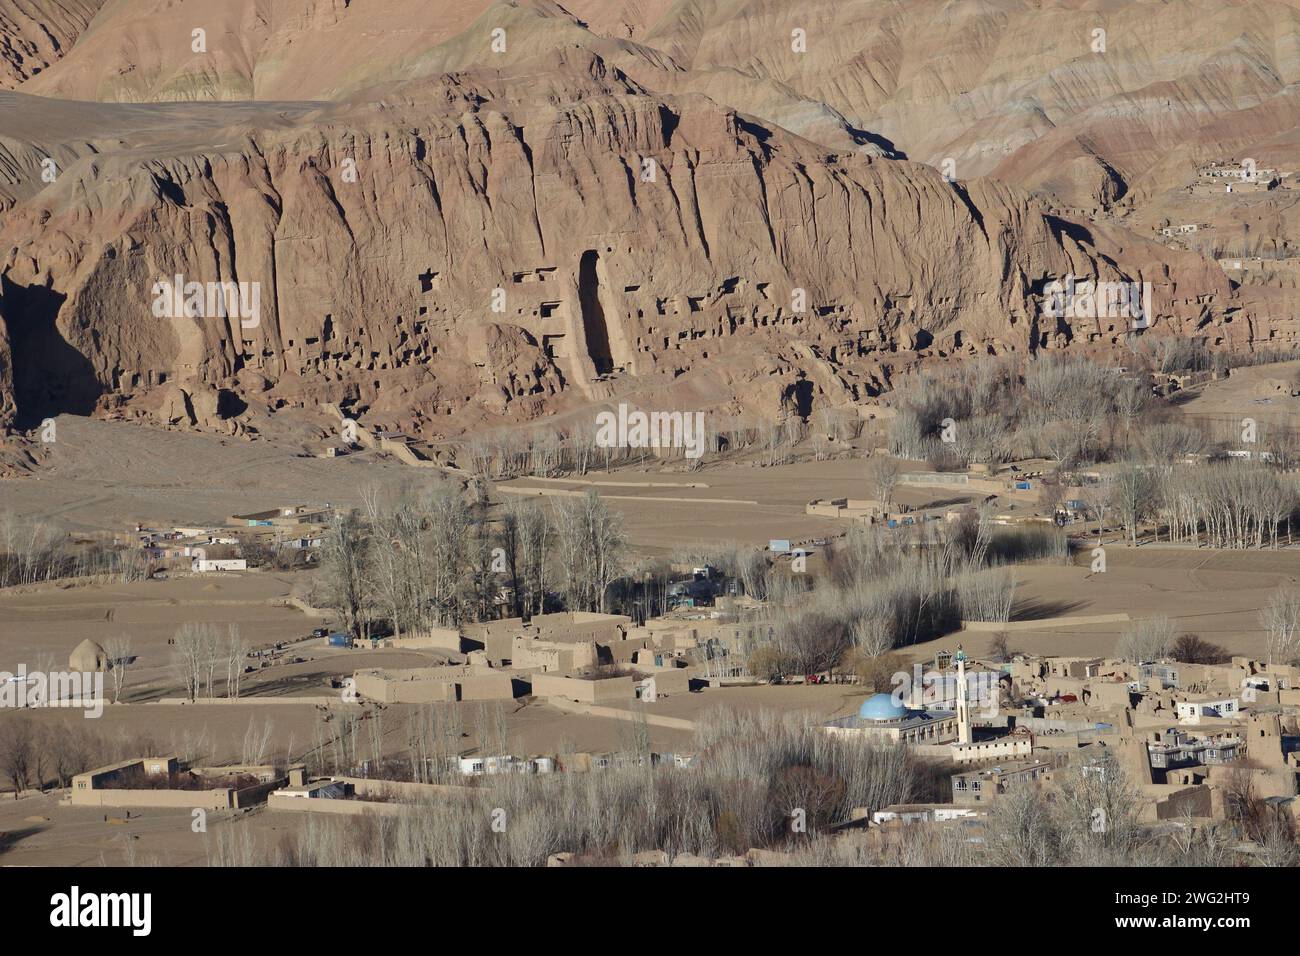 The beautiful view of Bamiyan Valley with majestic rock formations and dry vegetation. Afghanistan Stock Photo